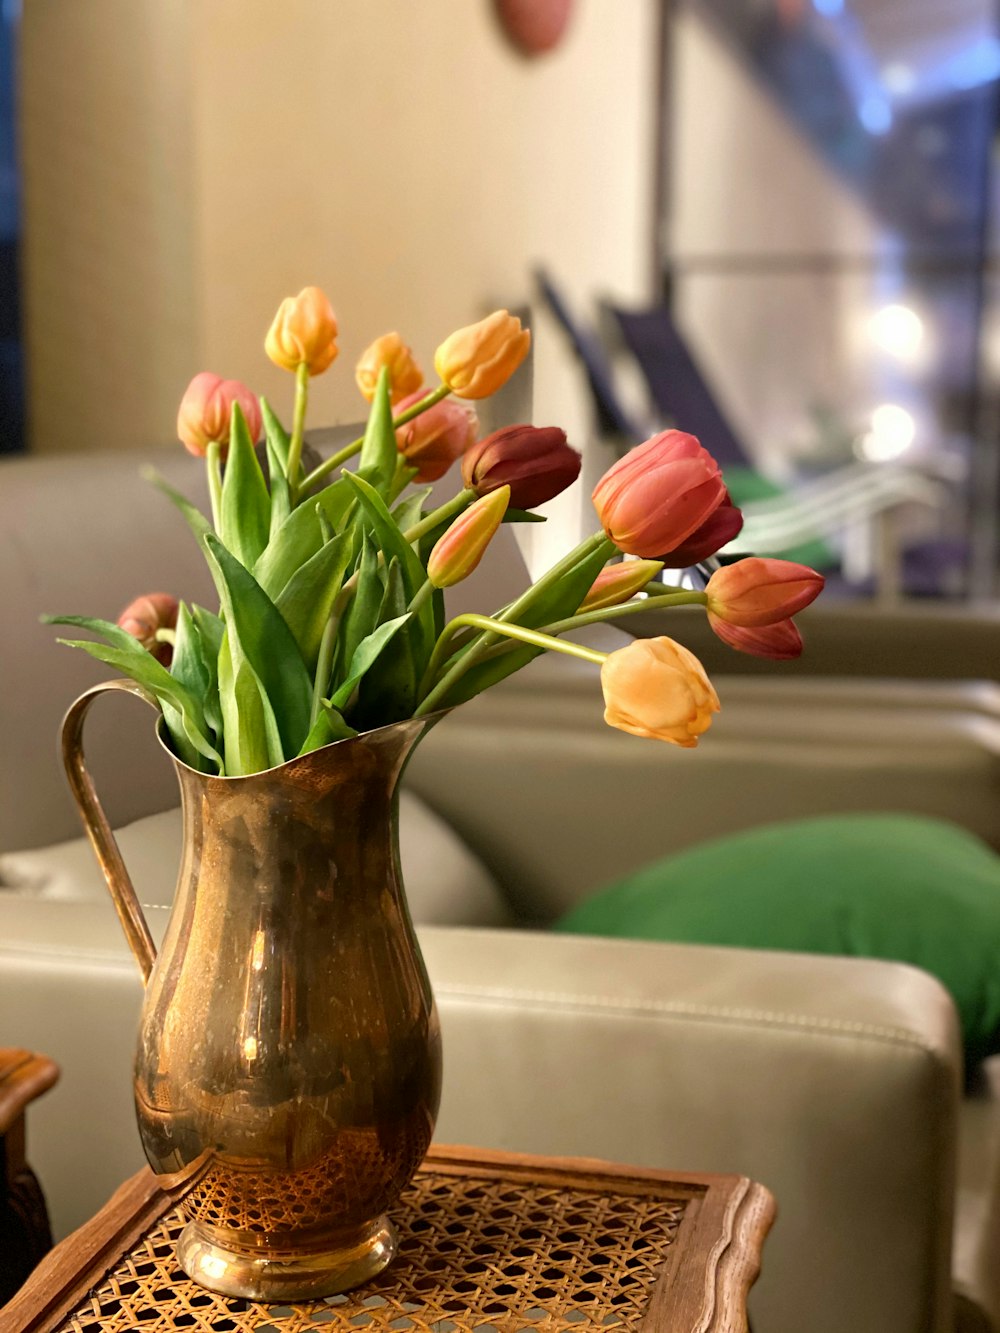 yellow and red tulips in brown ceramic vase